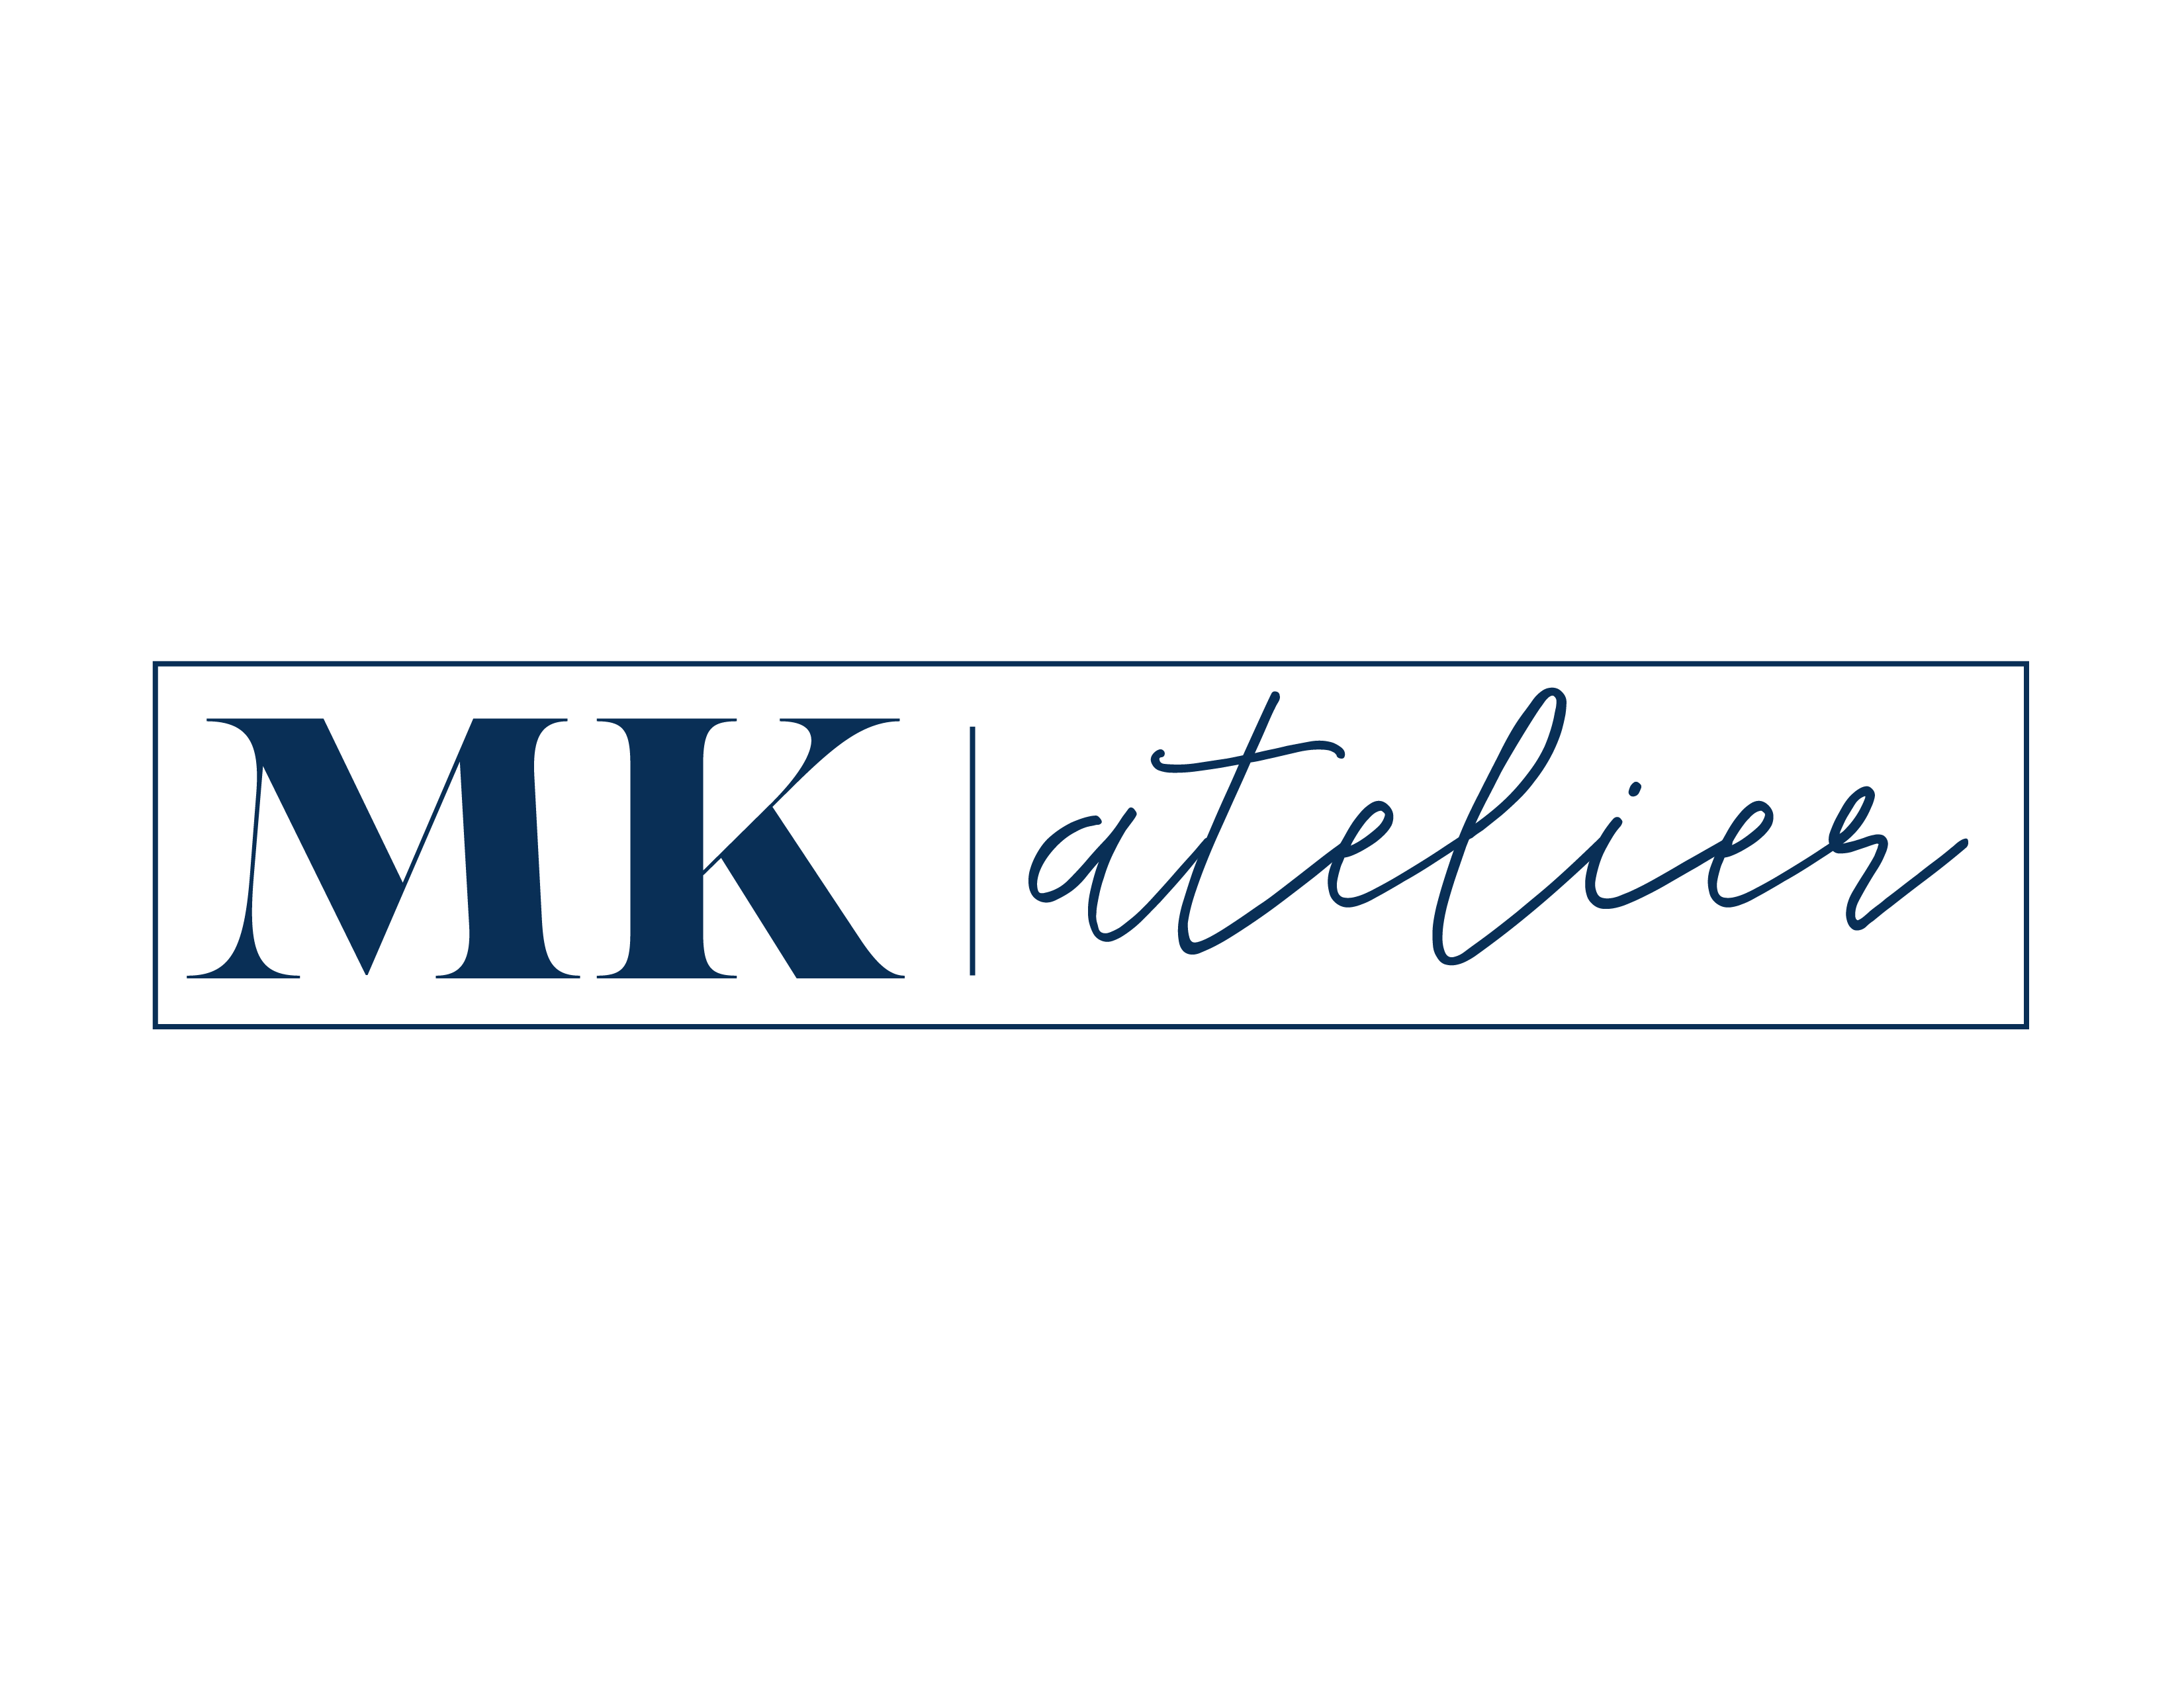 Client of the midnight oil group - MK Atelier